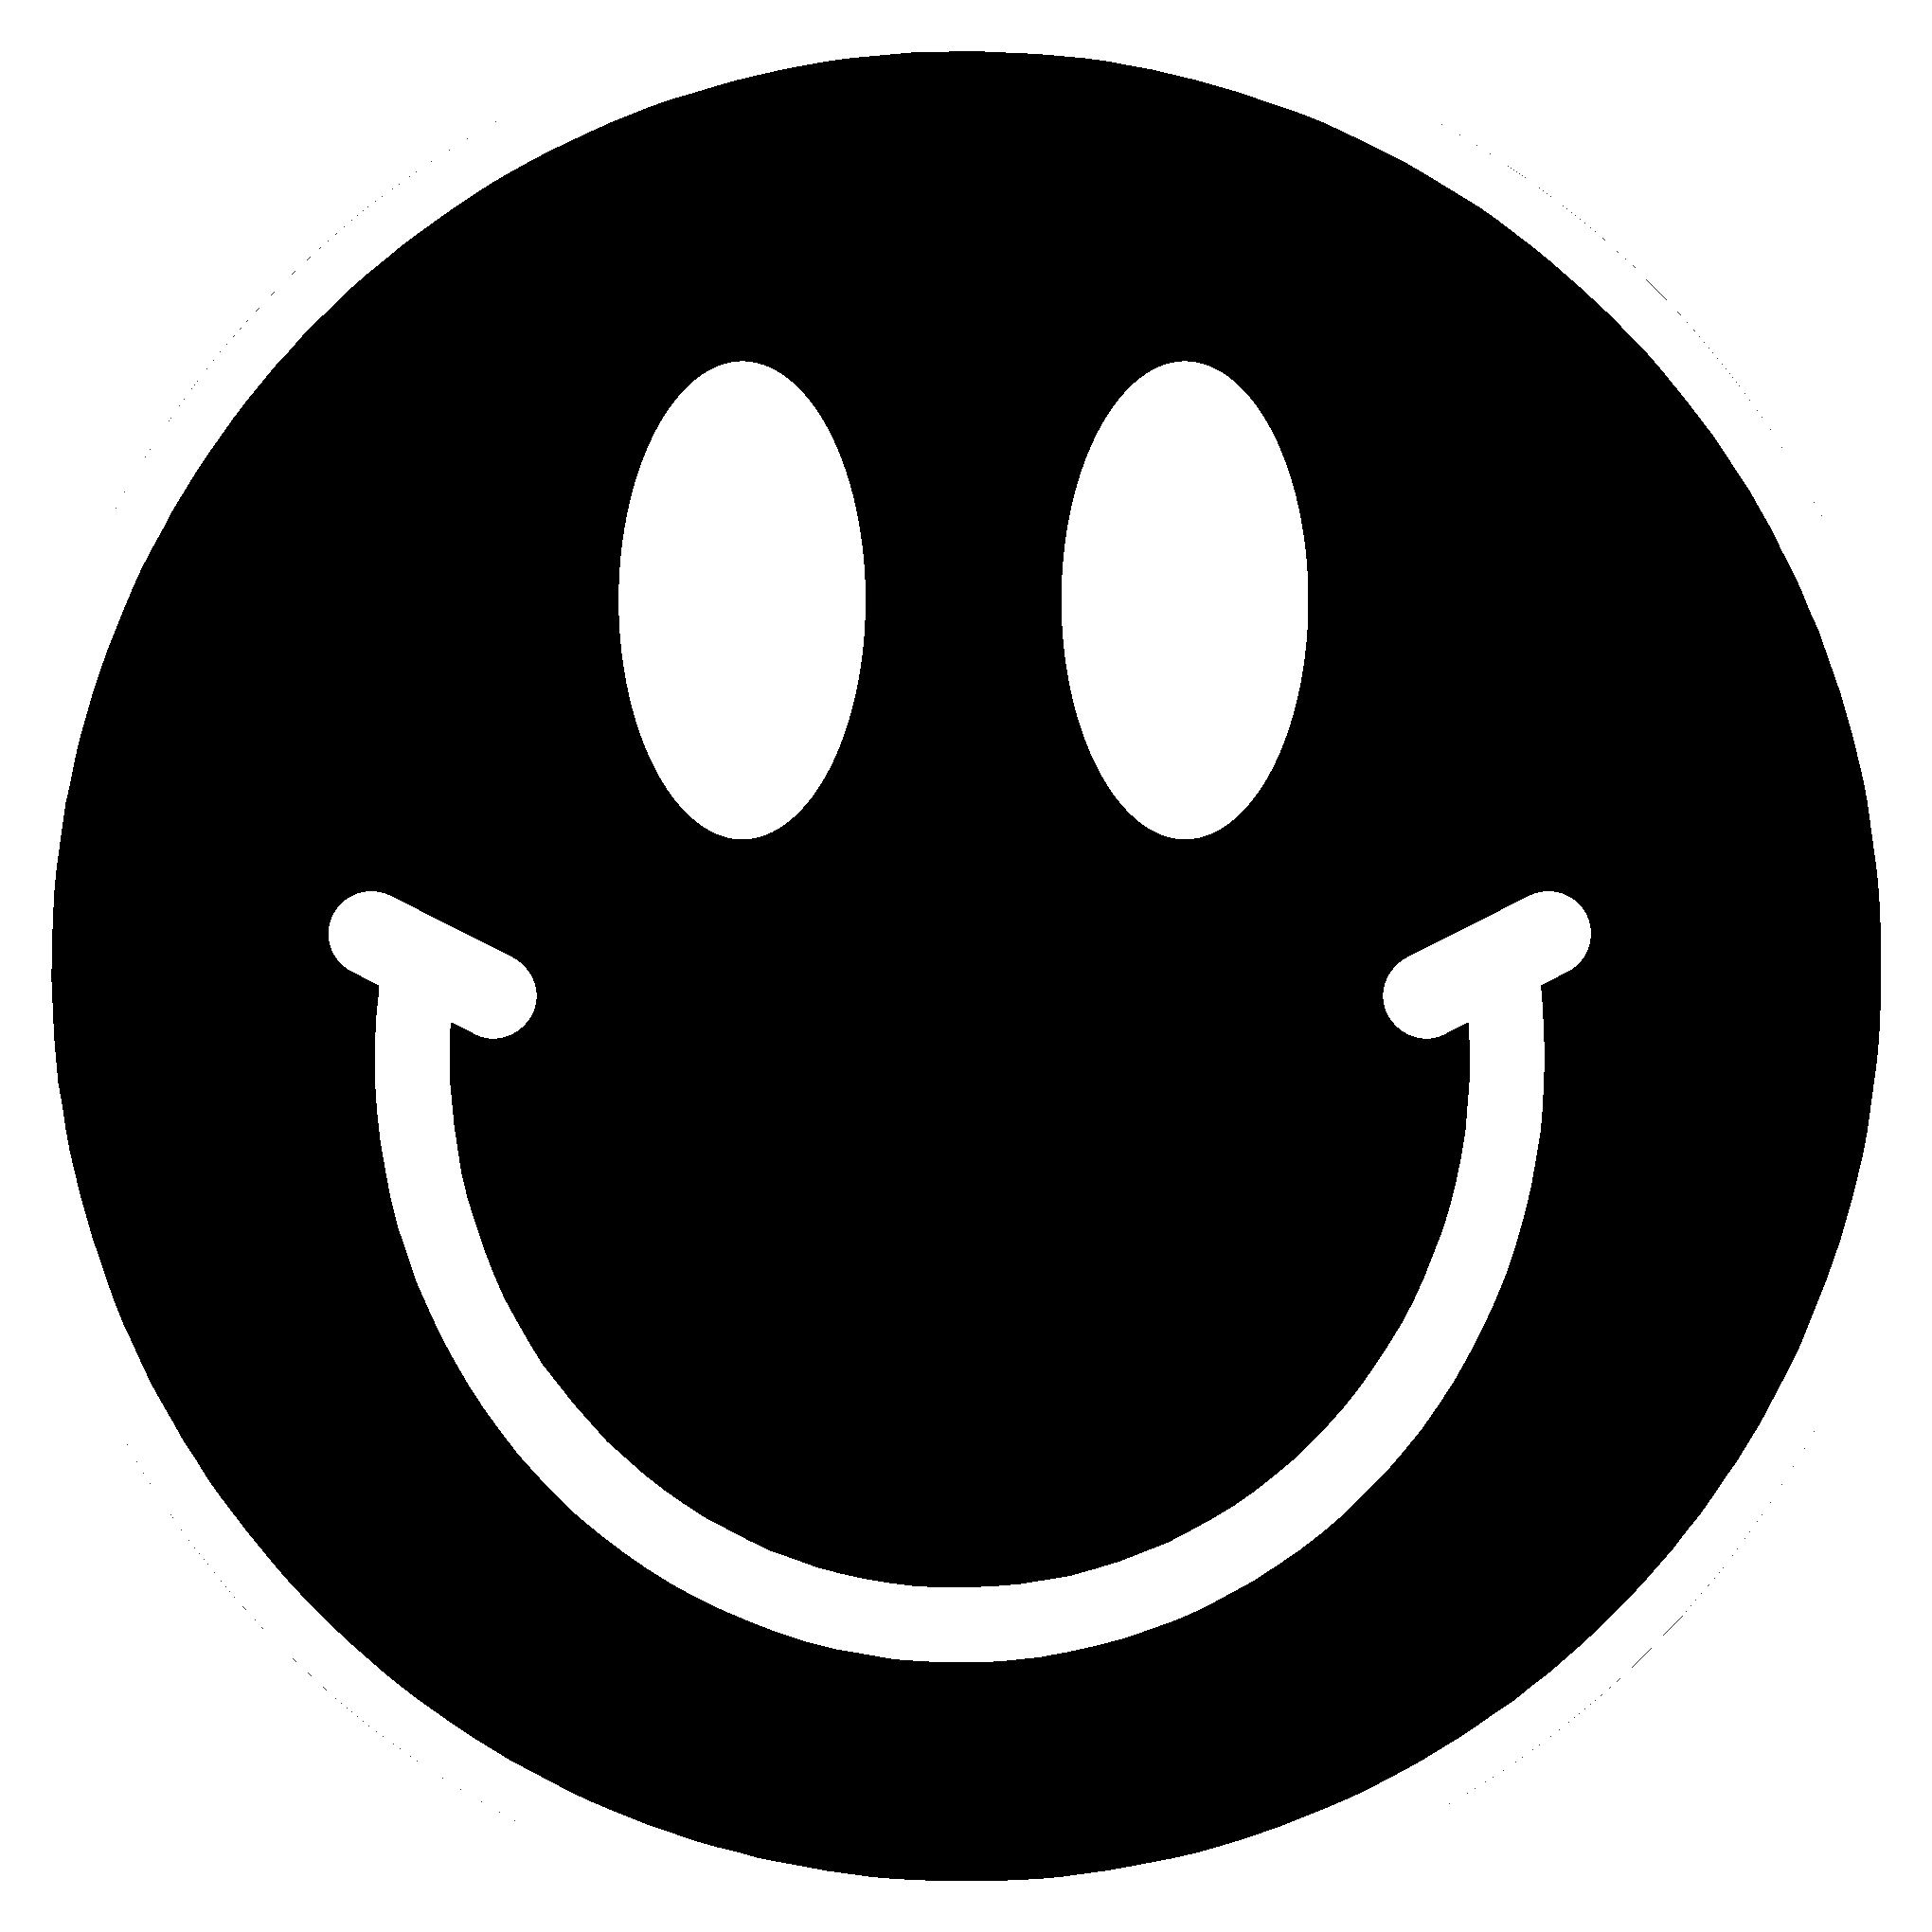 Smiley Face Black Backgrounds   Wallpaper Cave